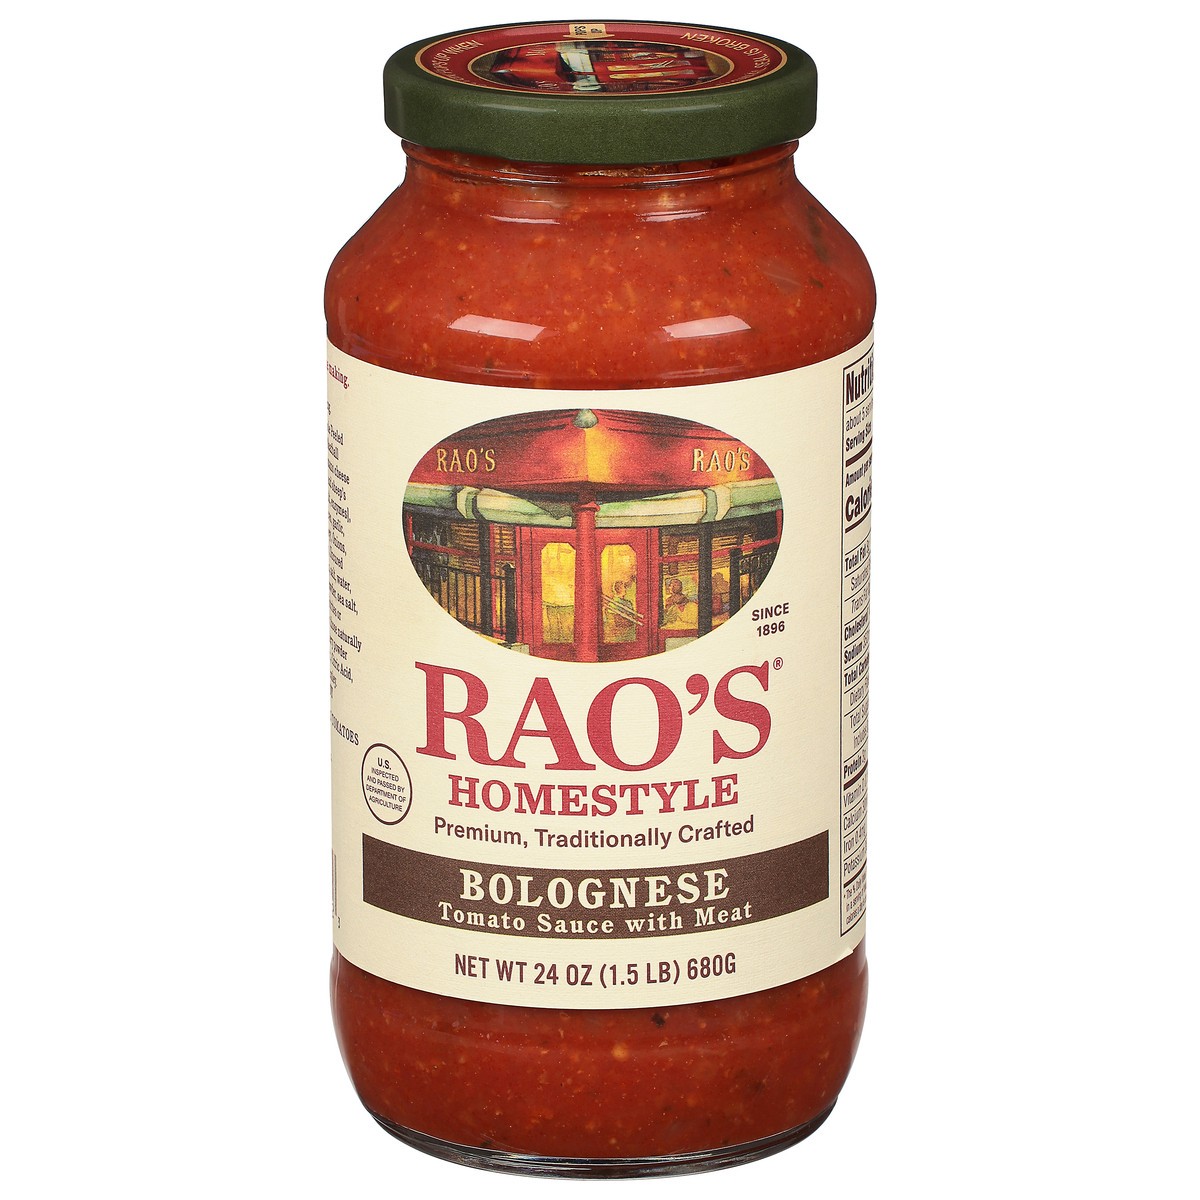 slide 1 of 8, Rao's Homemade Homestyle Bolognese Tomato Sauce with Meat 24 oz, 24 oz